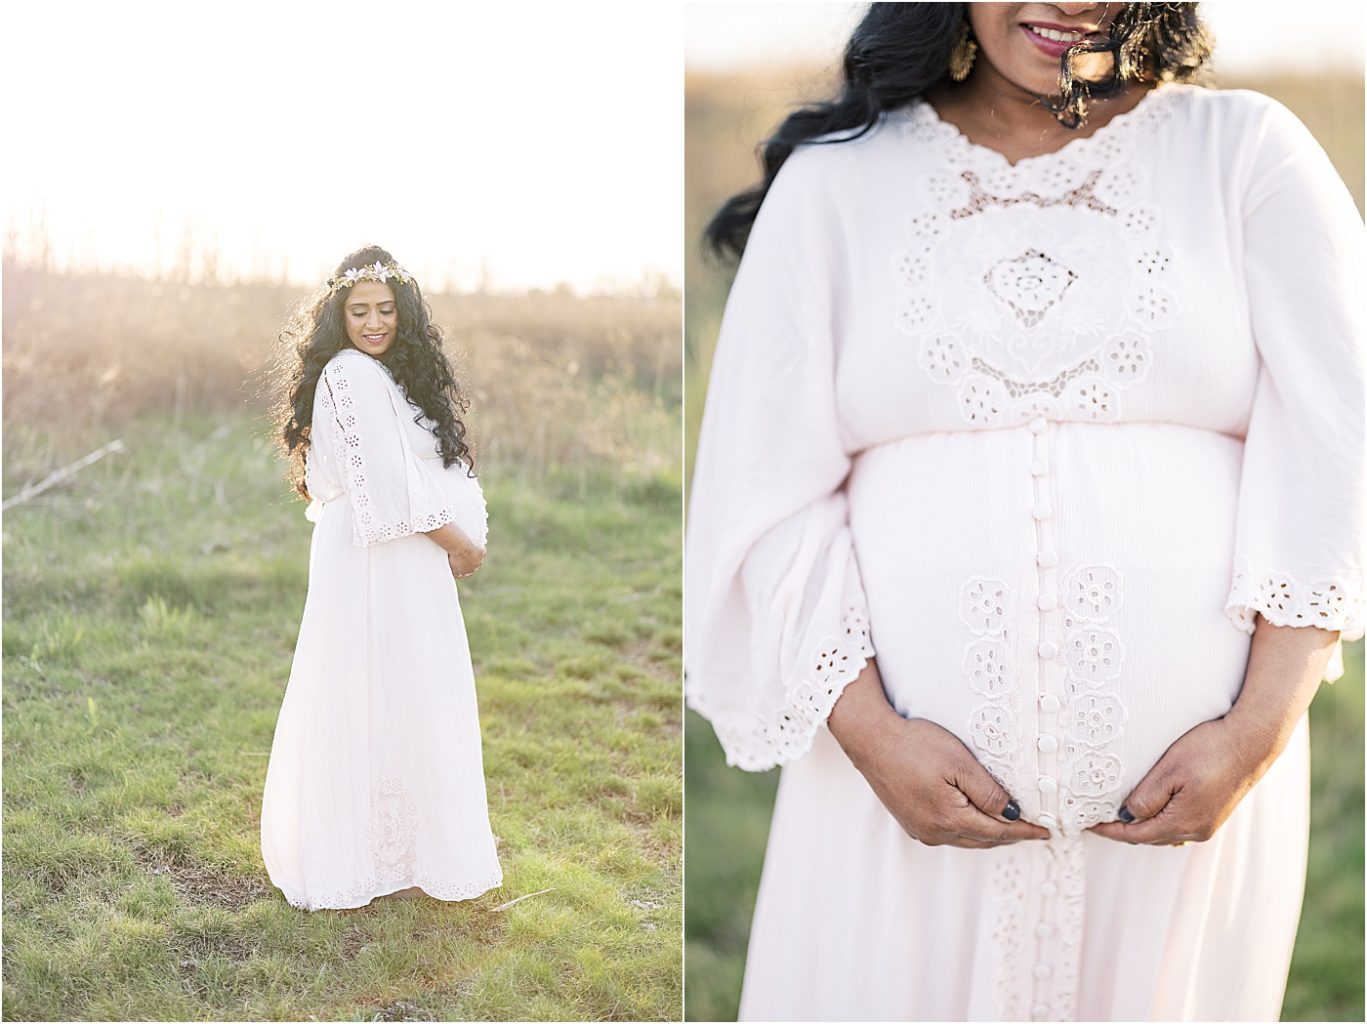 Outdoor maternity session in Fishers Indiana. Photo by Lindsay Konopa Photography.